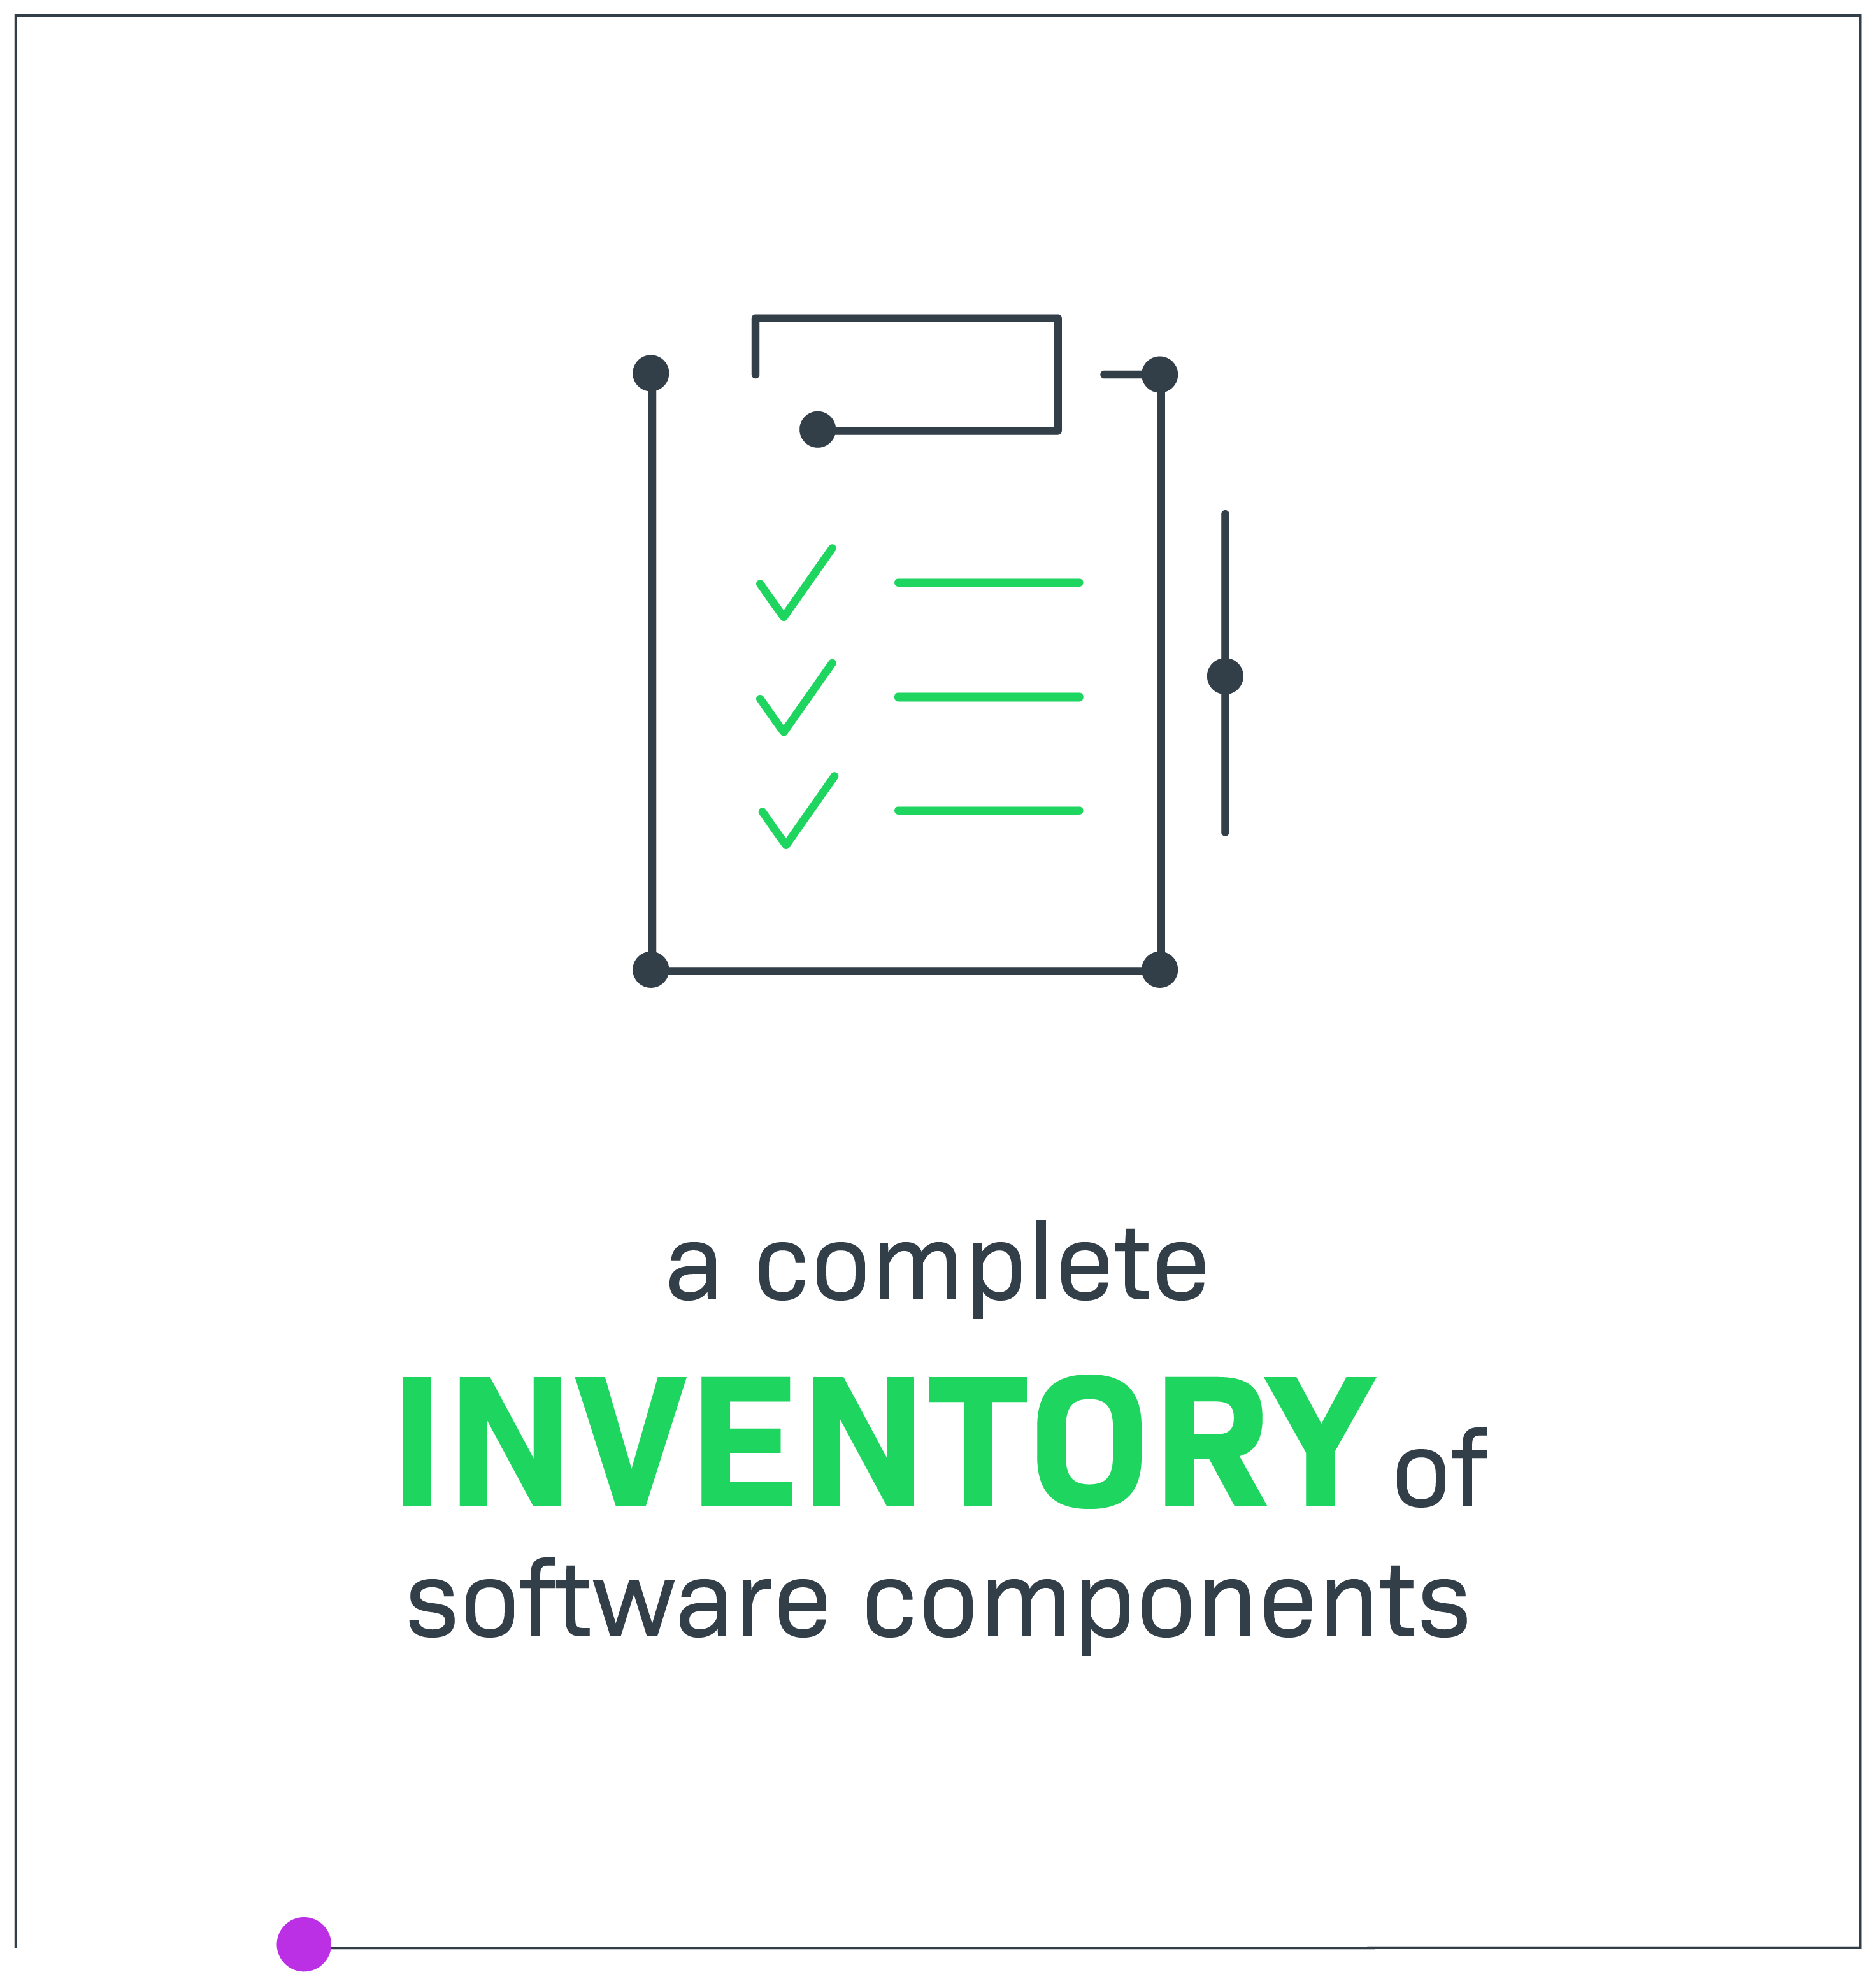 A complete inventory of software components